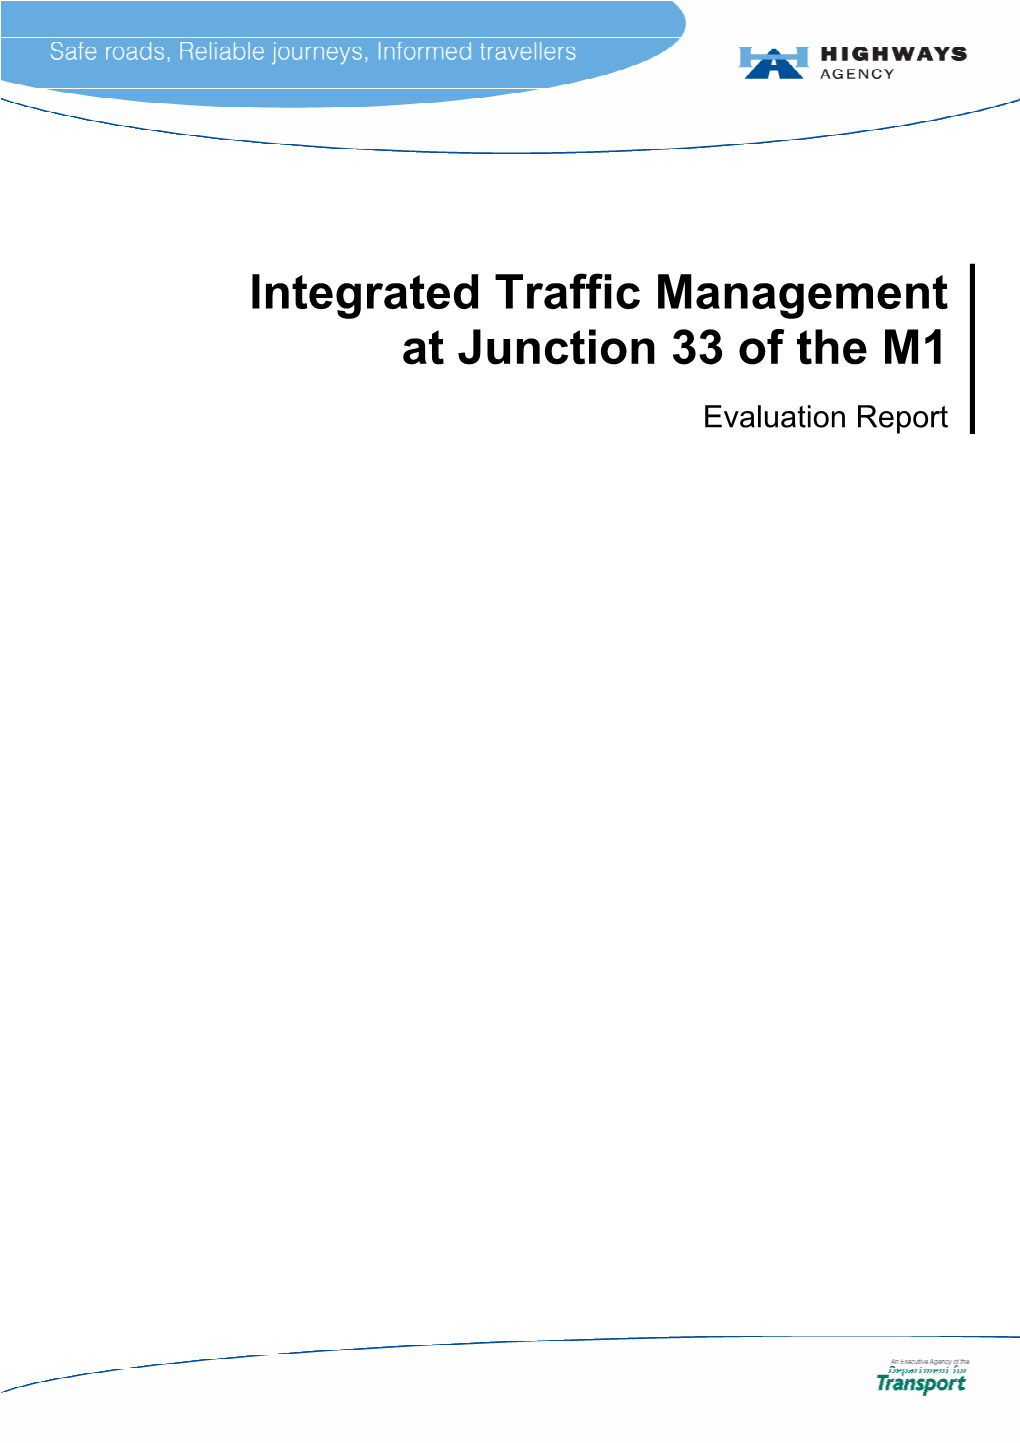 Integrated Traffic Management at Junction 33 of the M1 Evaluation Report